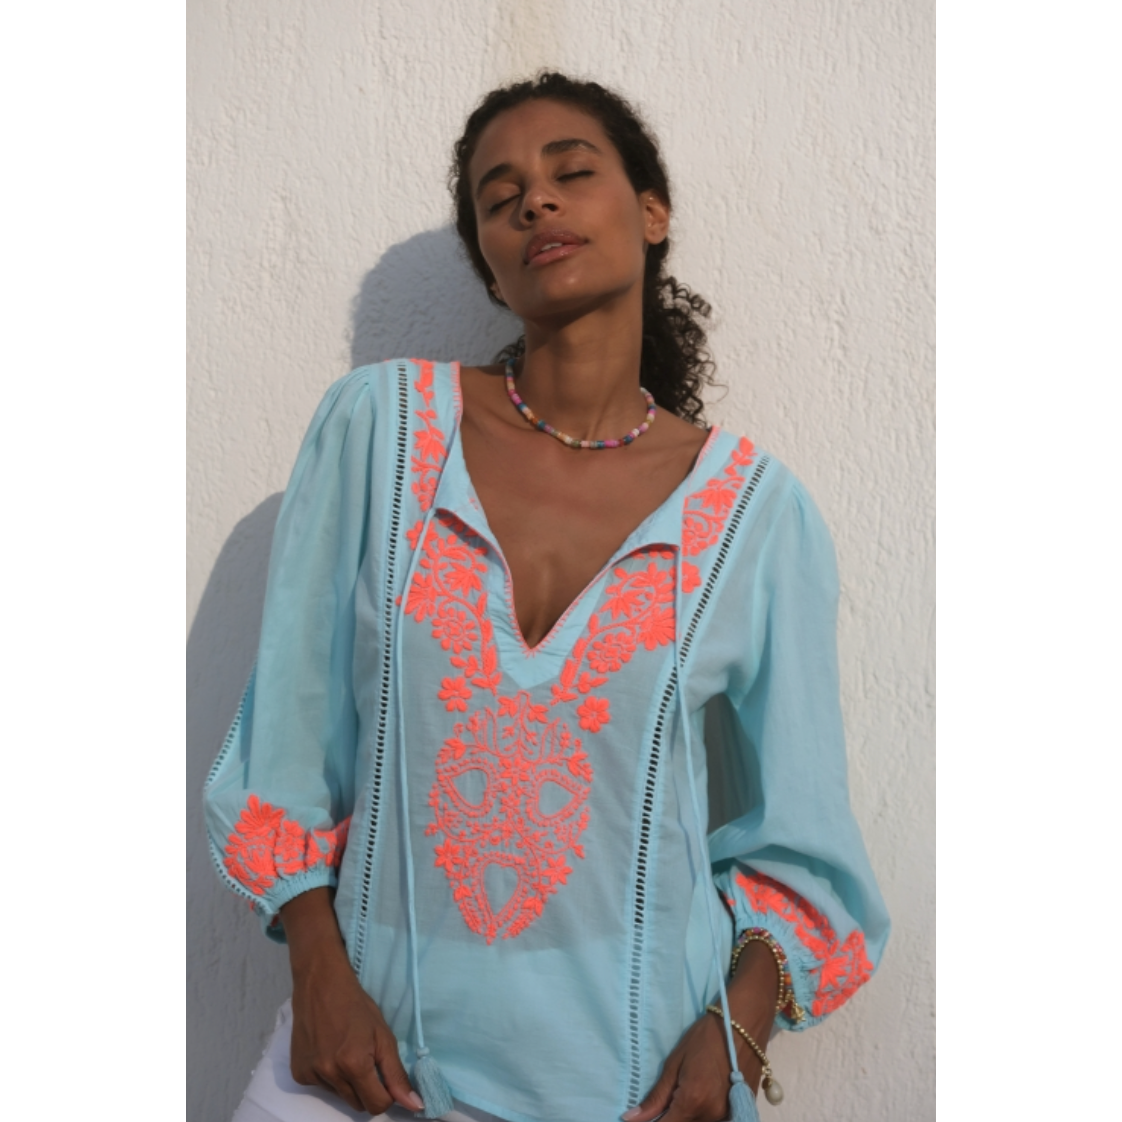 Made with classic cotton and featuring a stylish balloon sleeve, this top is elevated with neon pink embroidery on the front, back, and cuffs. The blanket stitch on the neck and tie tassels add a unique touch. Stay cool and chic this season.